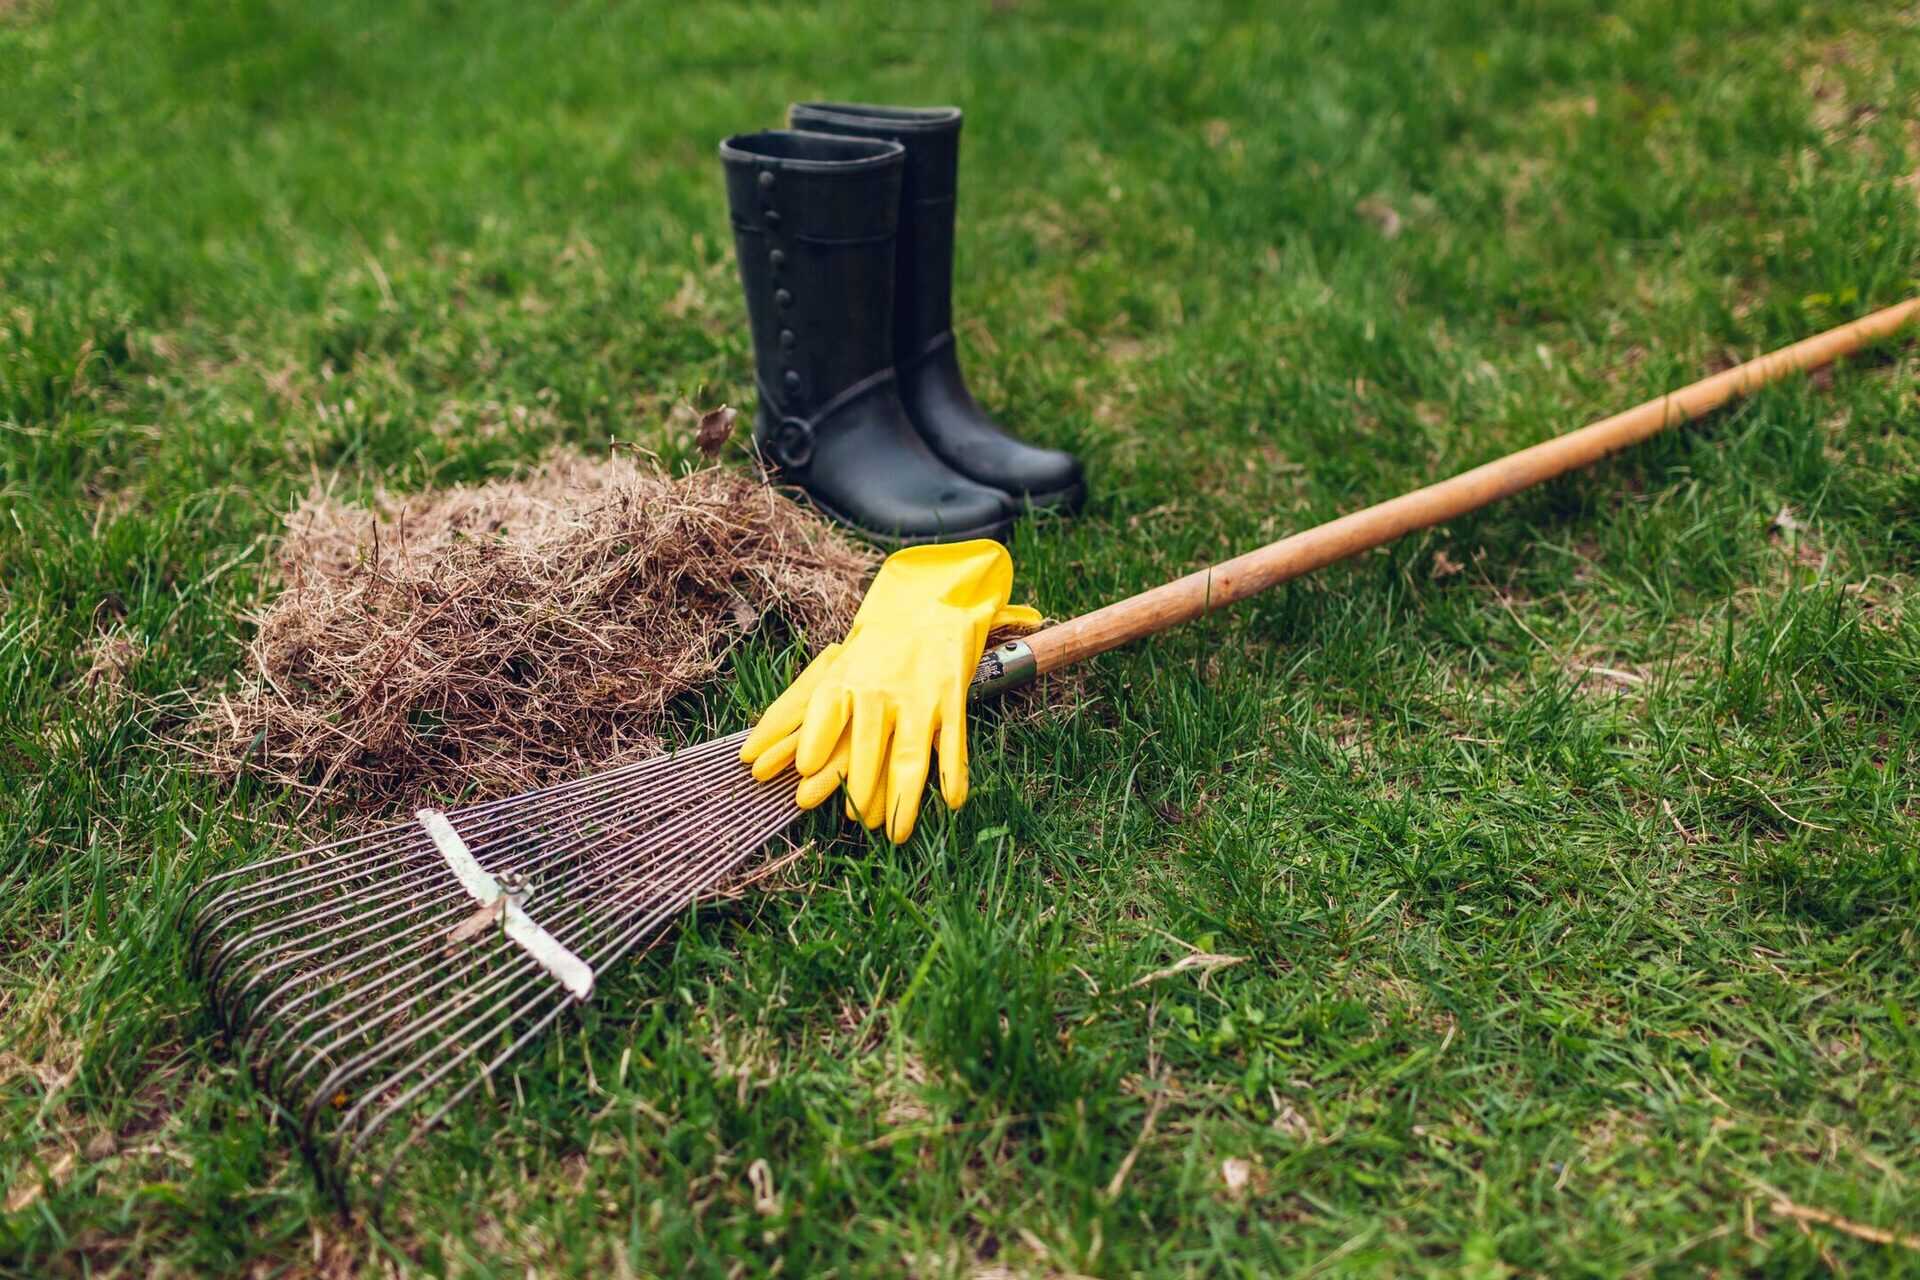 How To Treat Thatch In Lawns